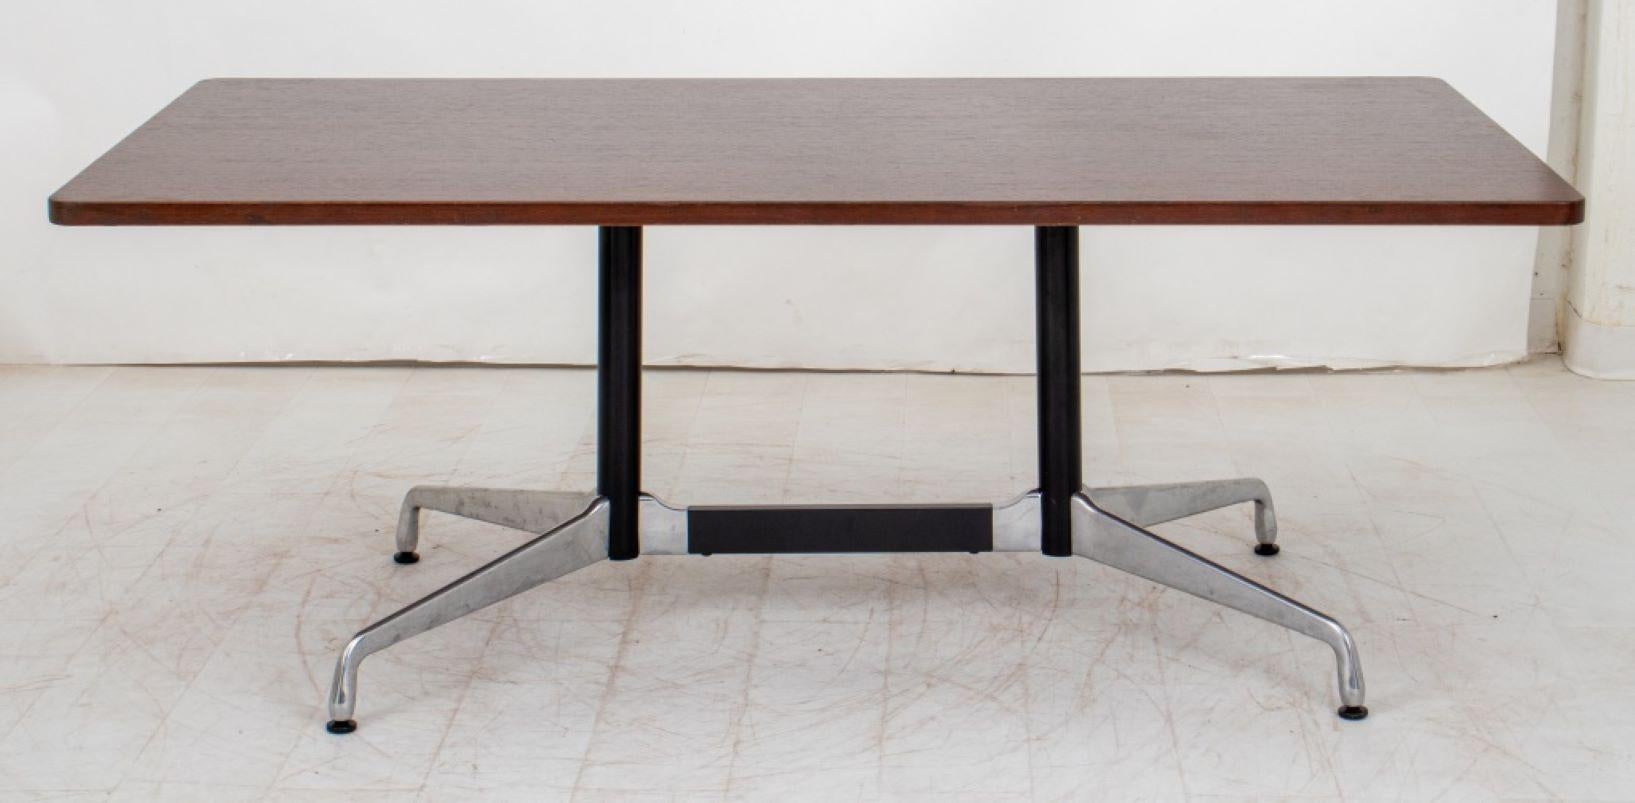 Charles and Ray Eames for Herman Miller Mid-Century Modern Rectangular Walnut Top Dining or Conference Table, on aluminum base with four feet, Eames label to underside of table top. 27.75